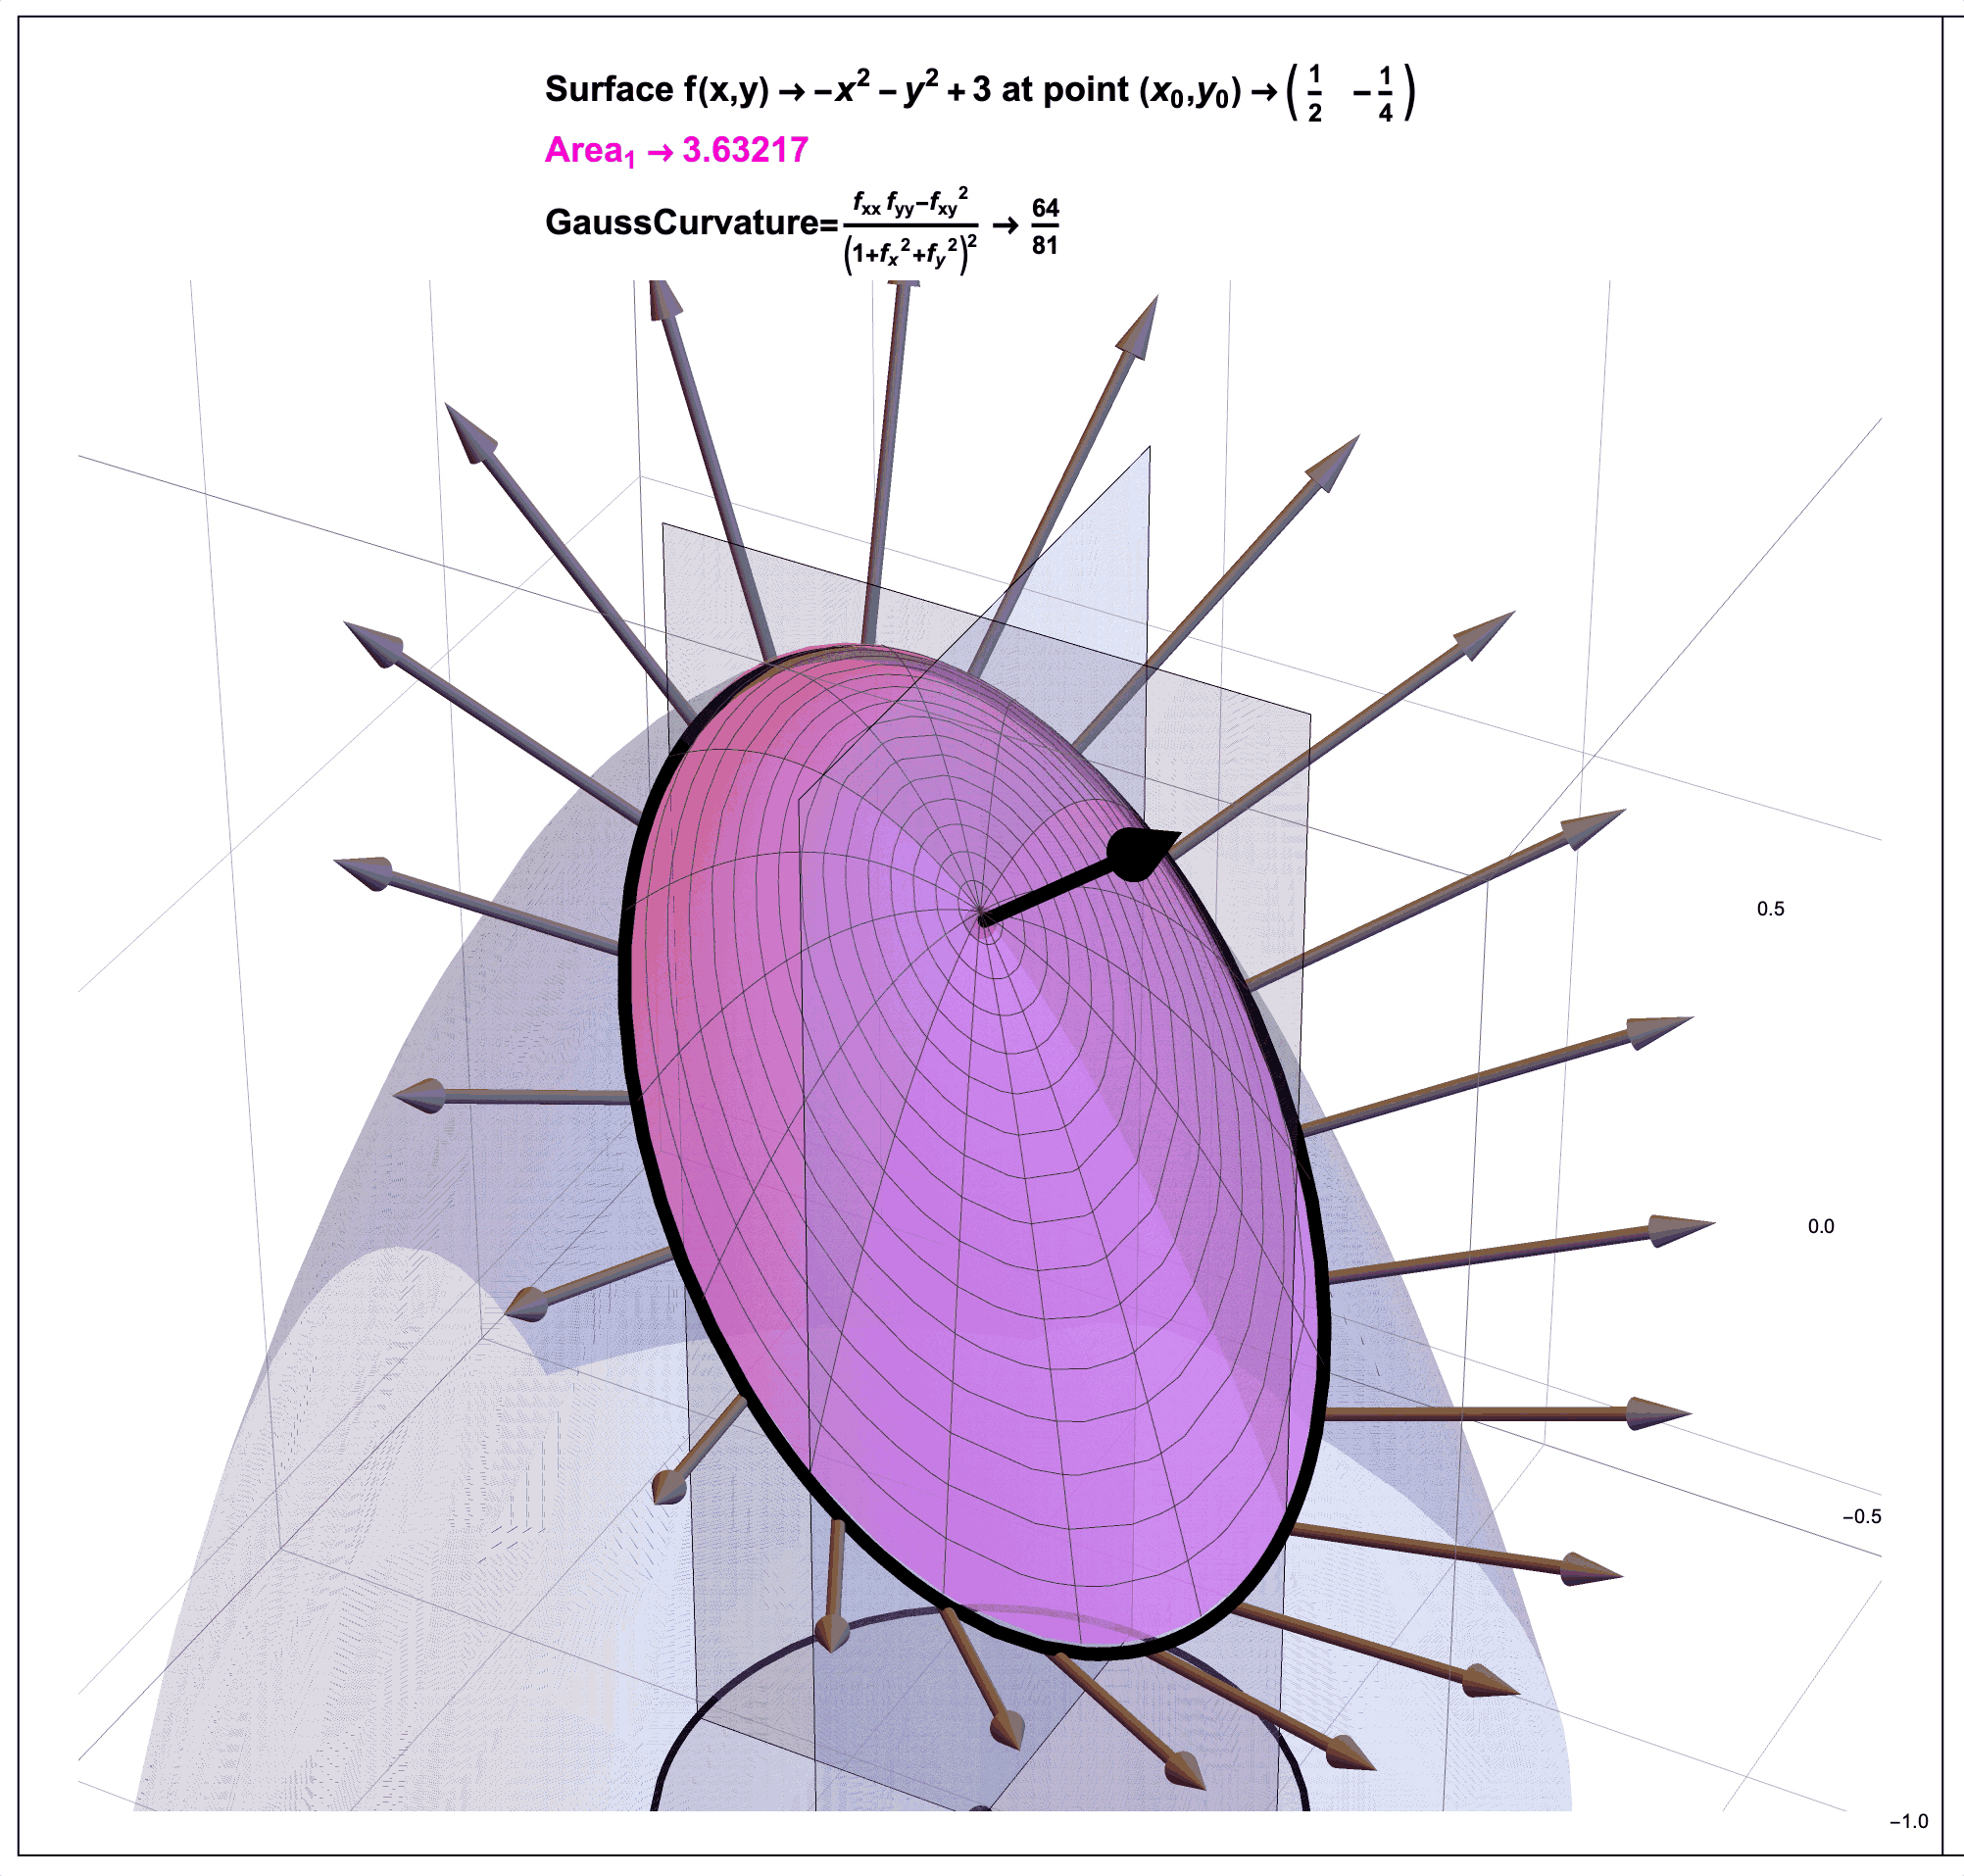 Gauss Curvature Illustration. In a future post, I will try in my own way to illustrate (literally) how the mathematician Carl Friedrich Gauss (1827) used a ratio of areas to quantify the curvature of a surface at a point. Note that as an example, for the surface \(f(x,y)=-x^2-y^2+3\) at the point \(P=(1/2,-1/4)\), the ratio of pink area (on the surface) to black area (on the sphere) as shown approaches the number \(0.793236\) which is close to \(64/81 \approx .790123\). That is, the Gauss Curvature of this function at this point is about \(0.79\).